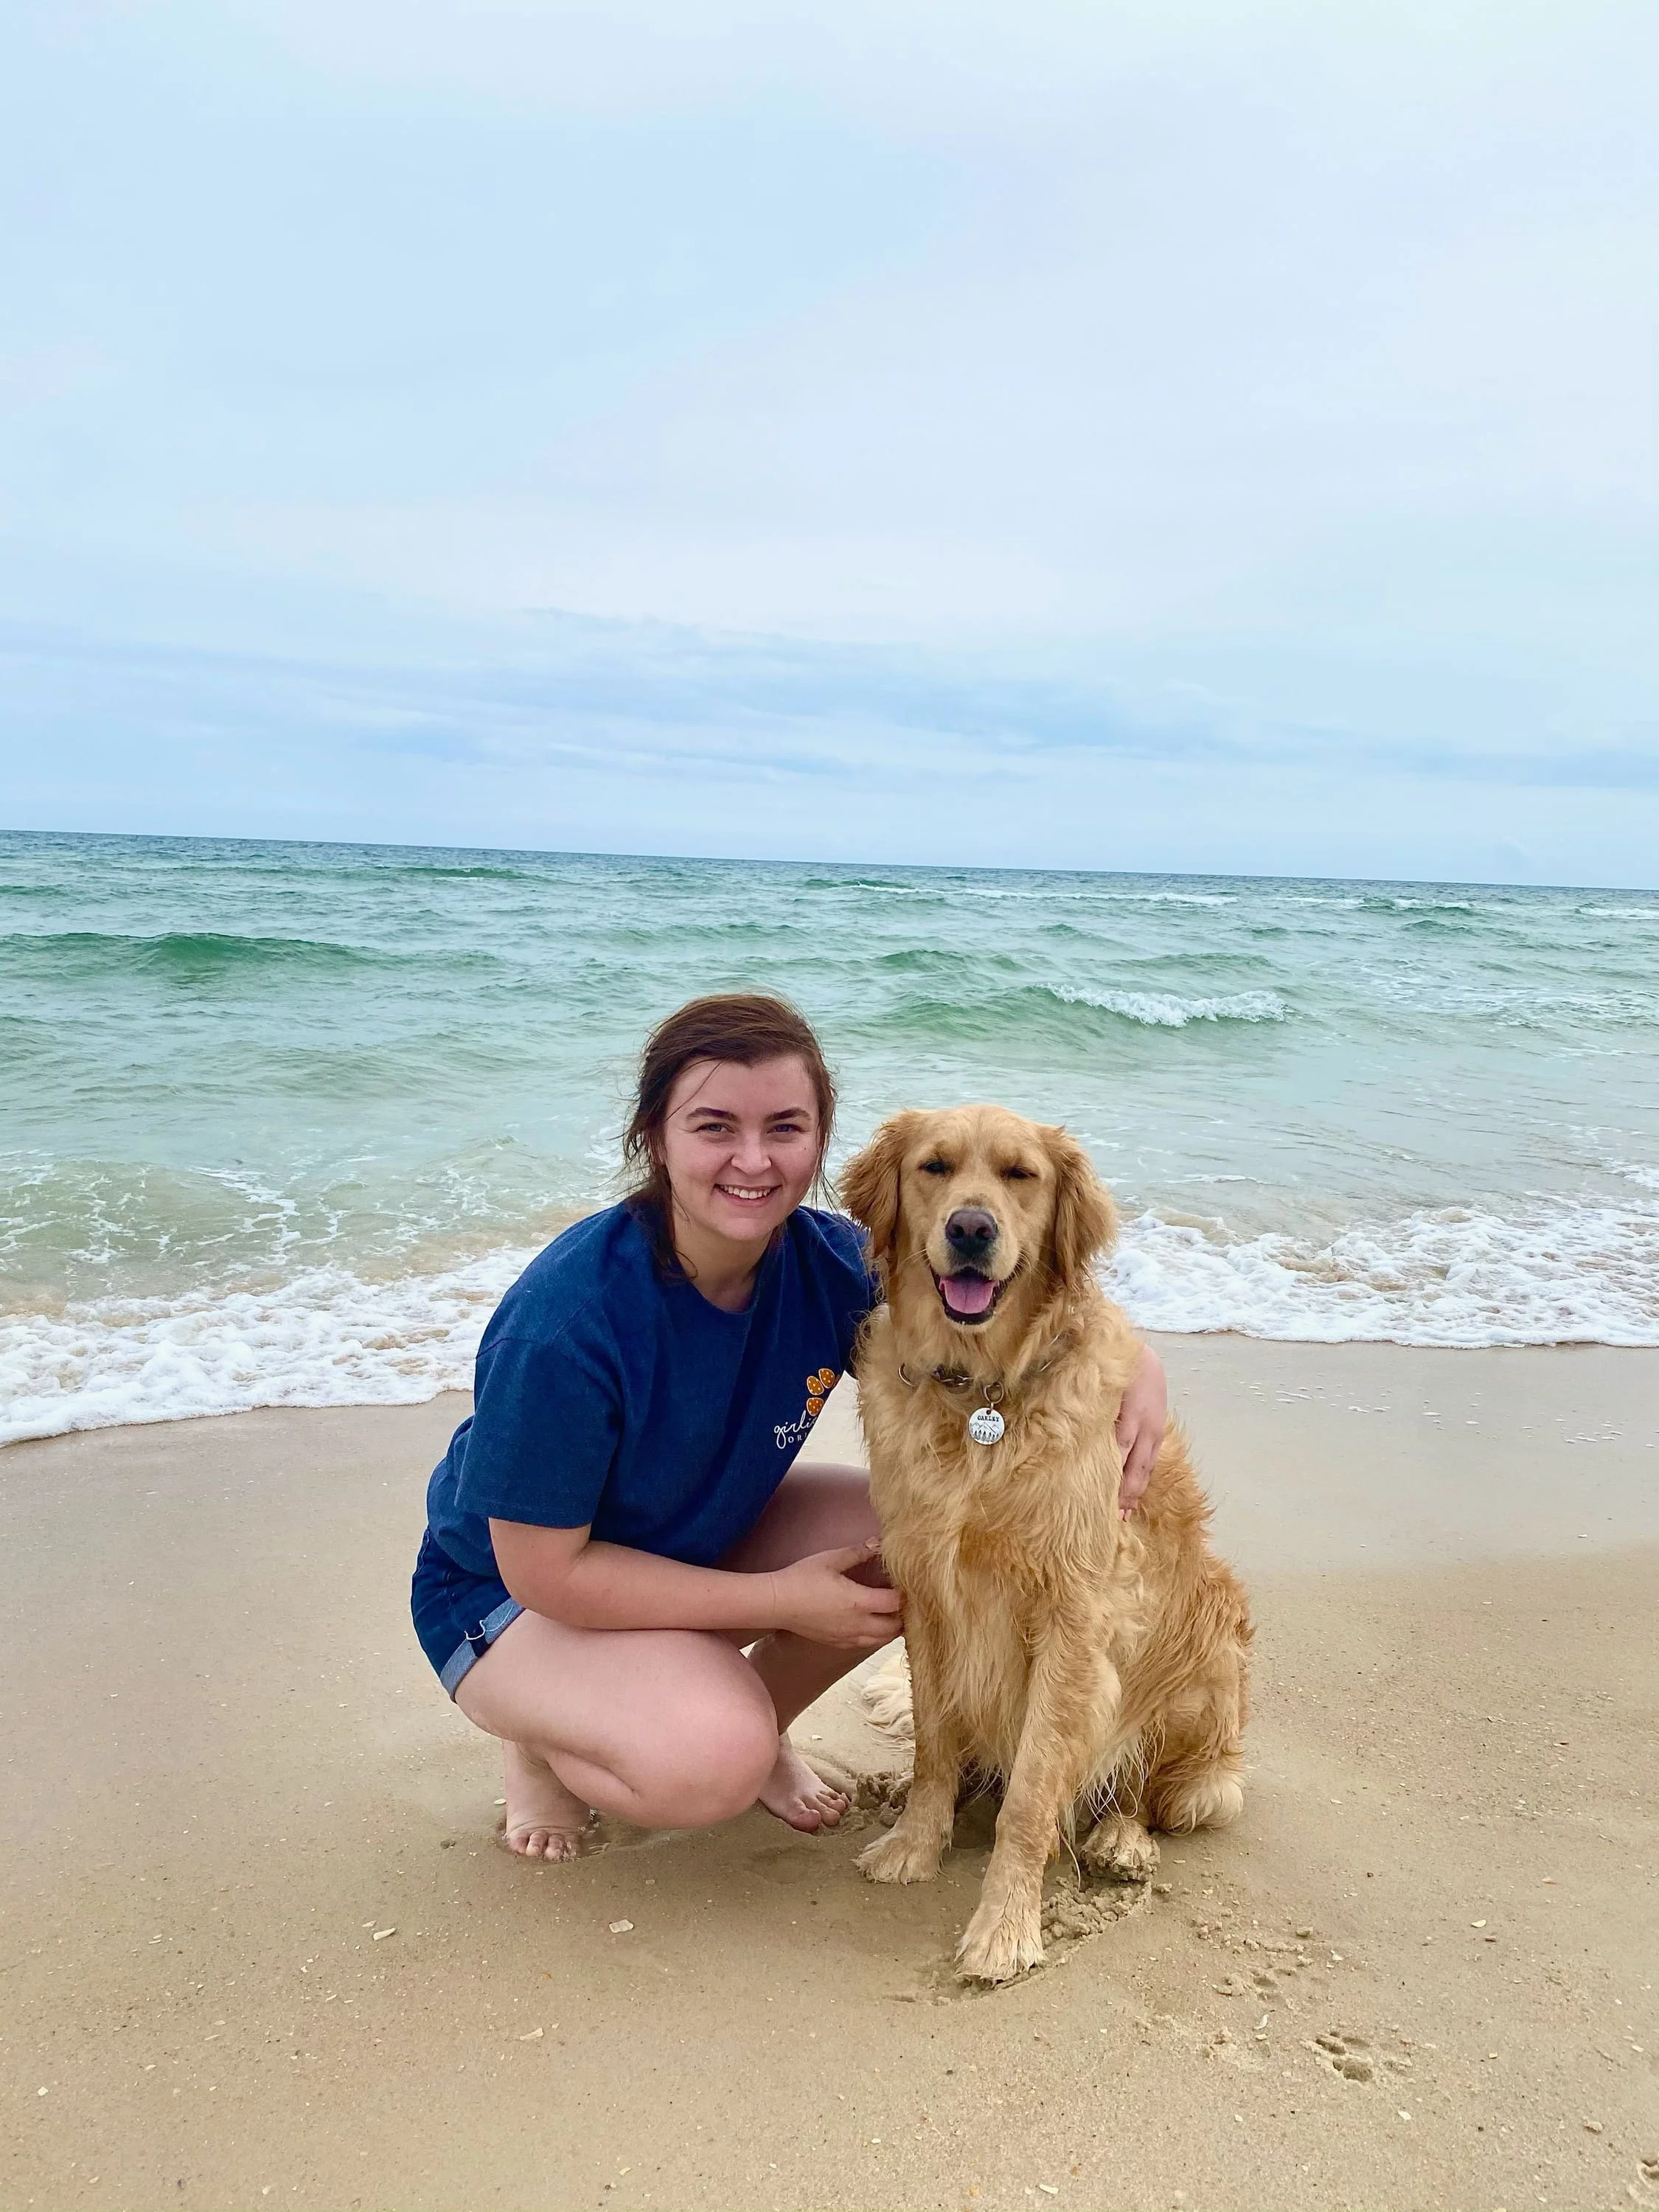 Devin and her golden retriever at the beach